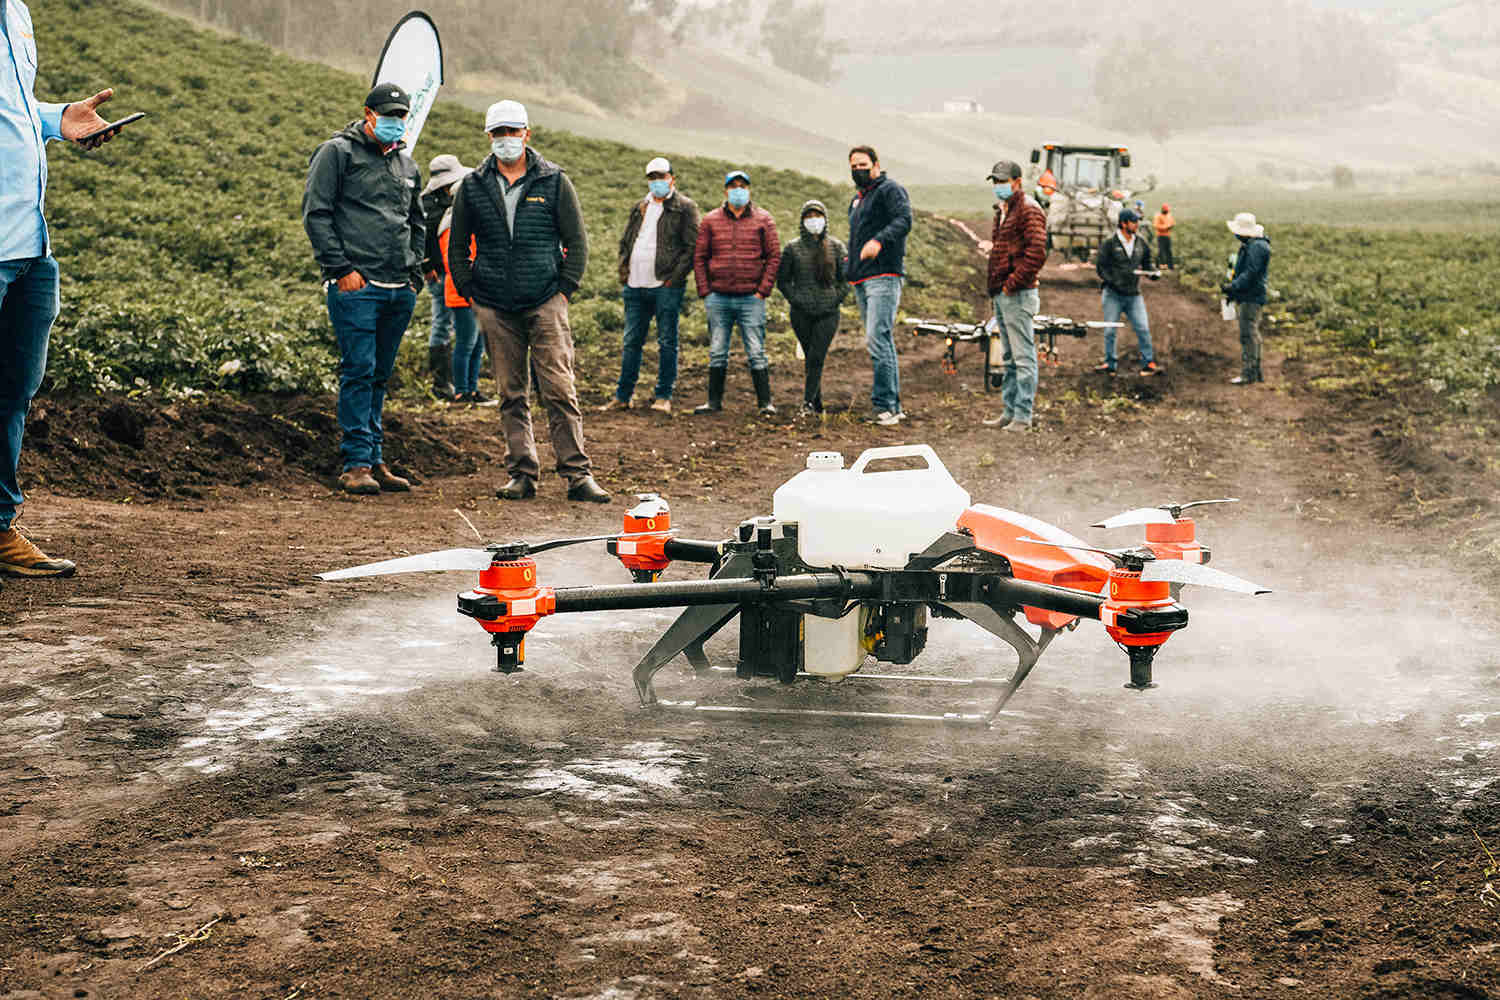  Ecuadorian farmers watch XAG's drone spraying crops for the first time